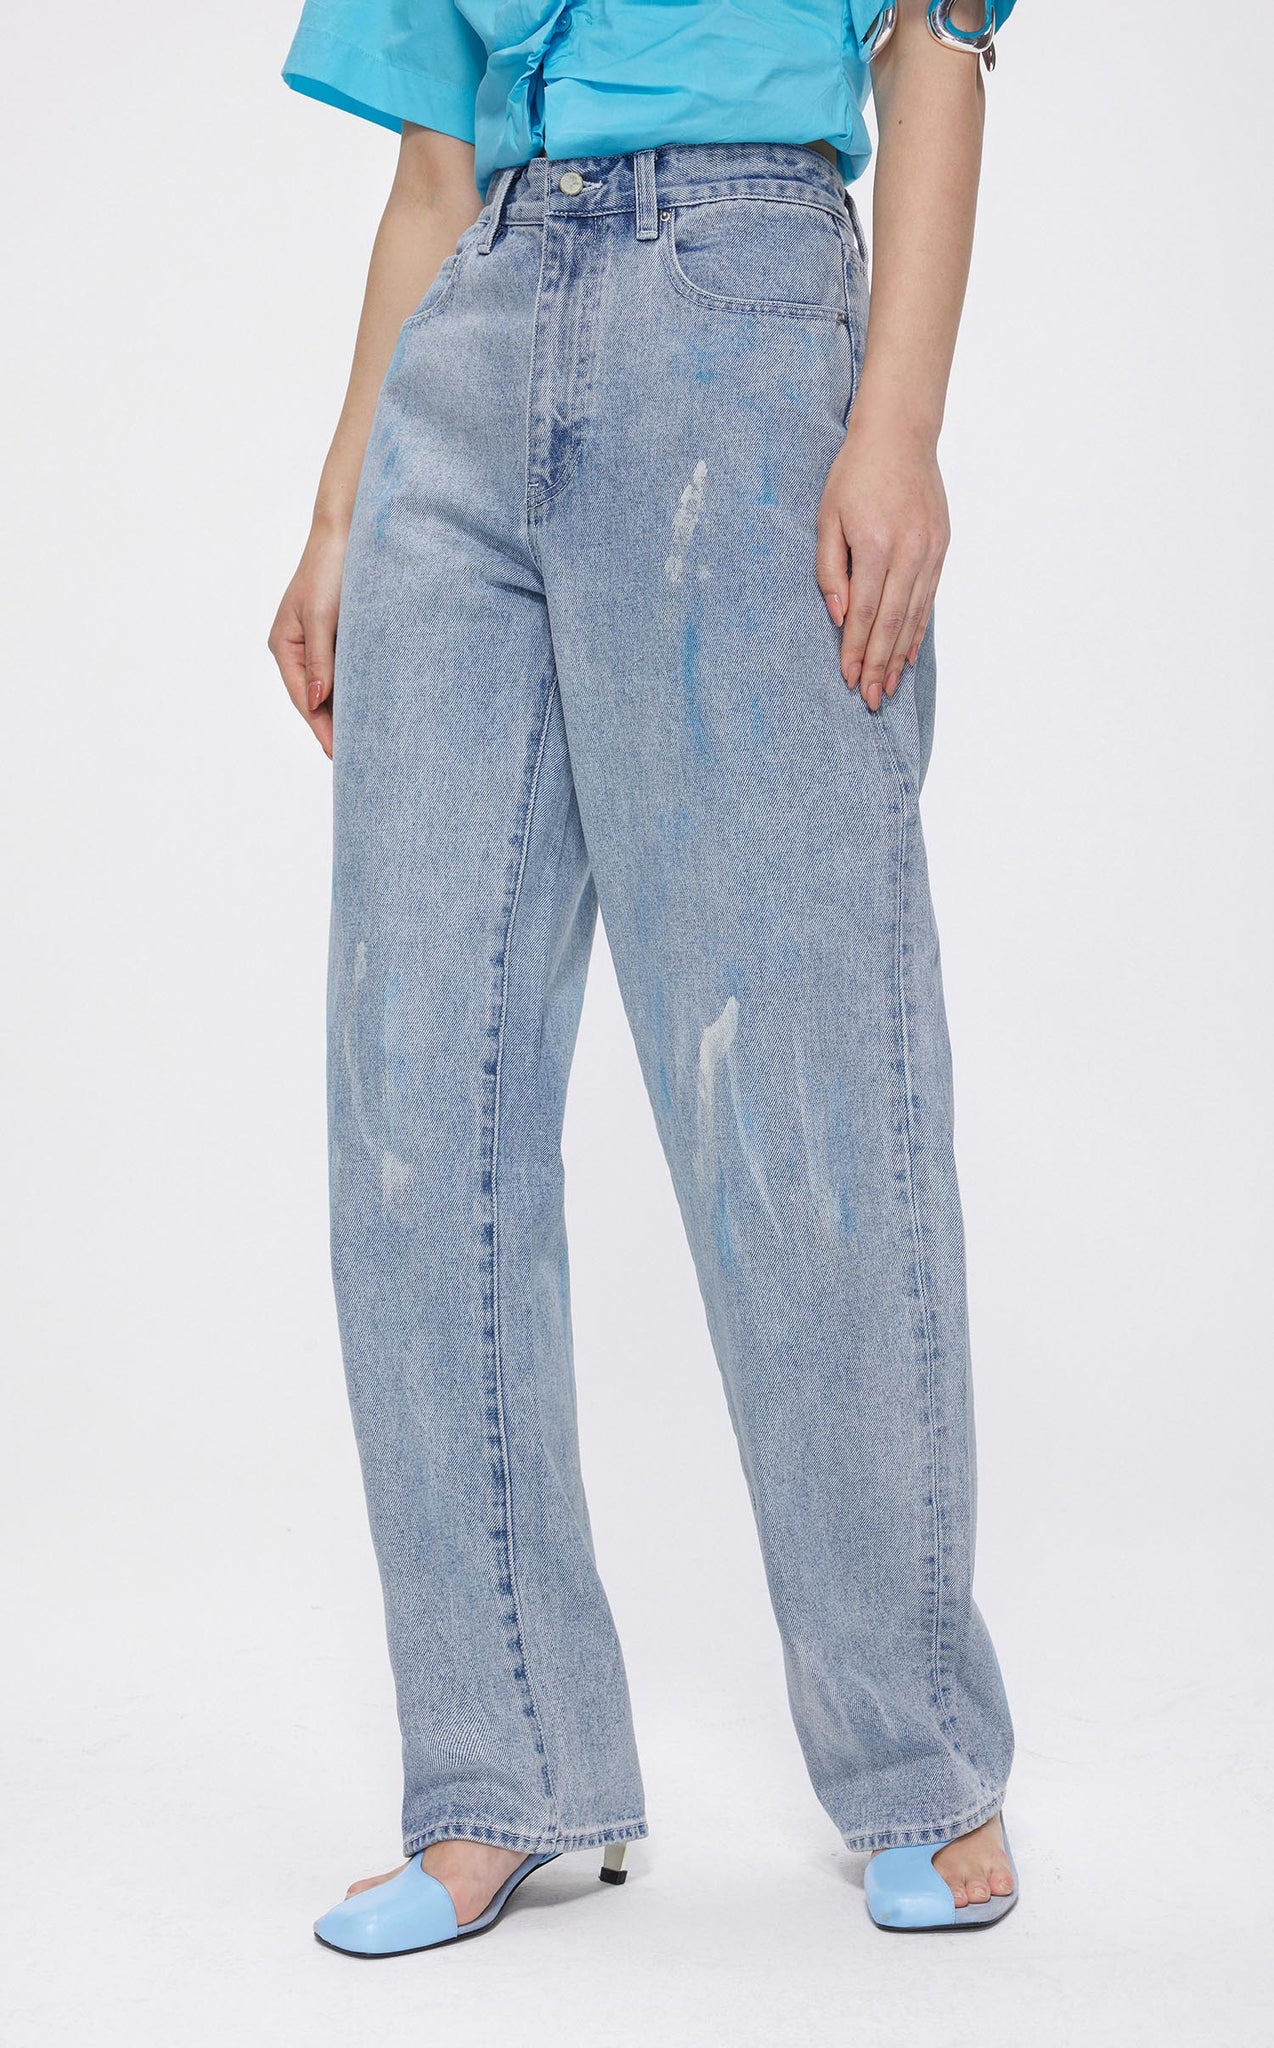 Jeans / JNBY Loose Fit Cotton Washed Jeans